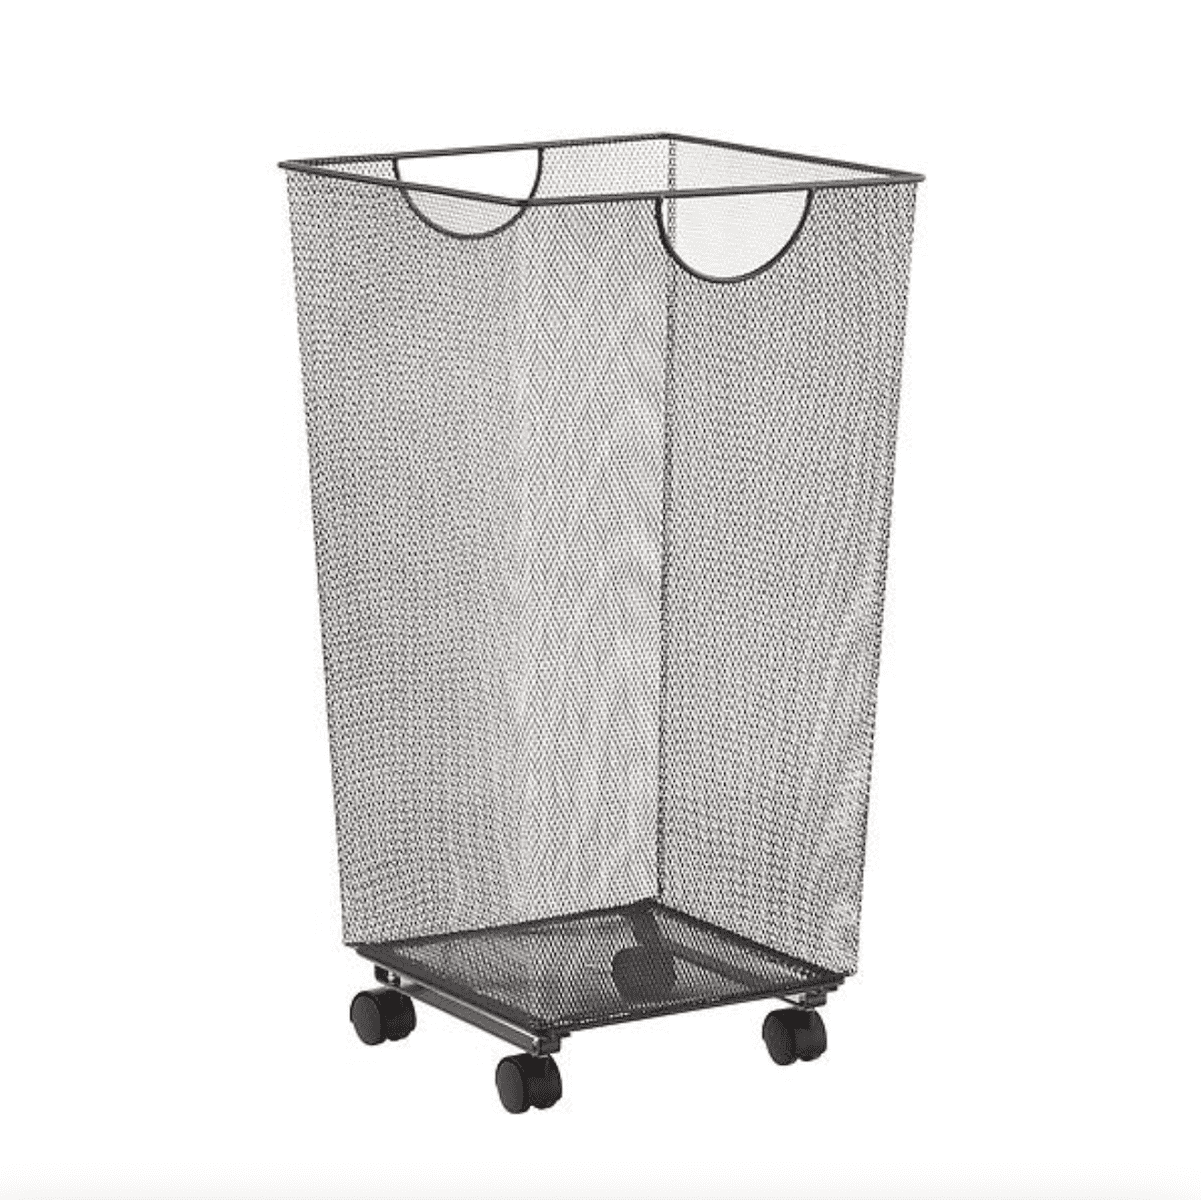 Costco Shop With Me - Collapsible Laundry Basket 